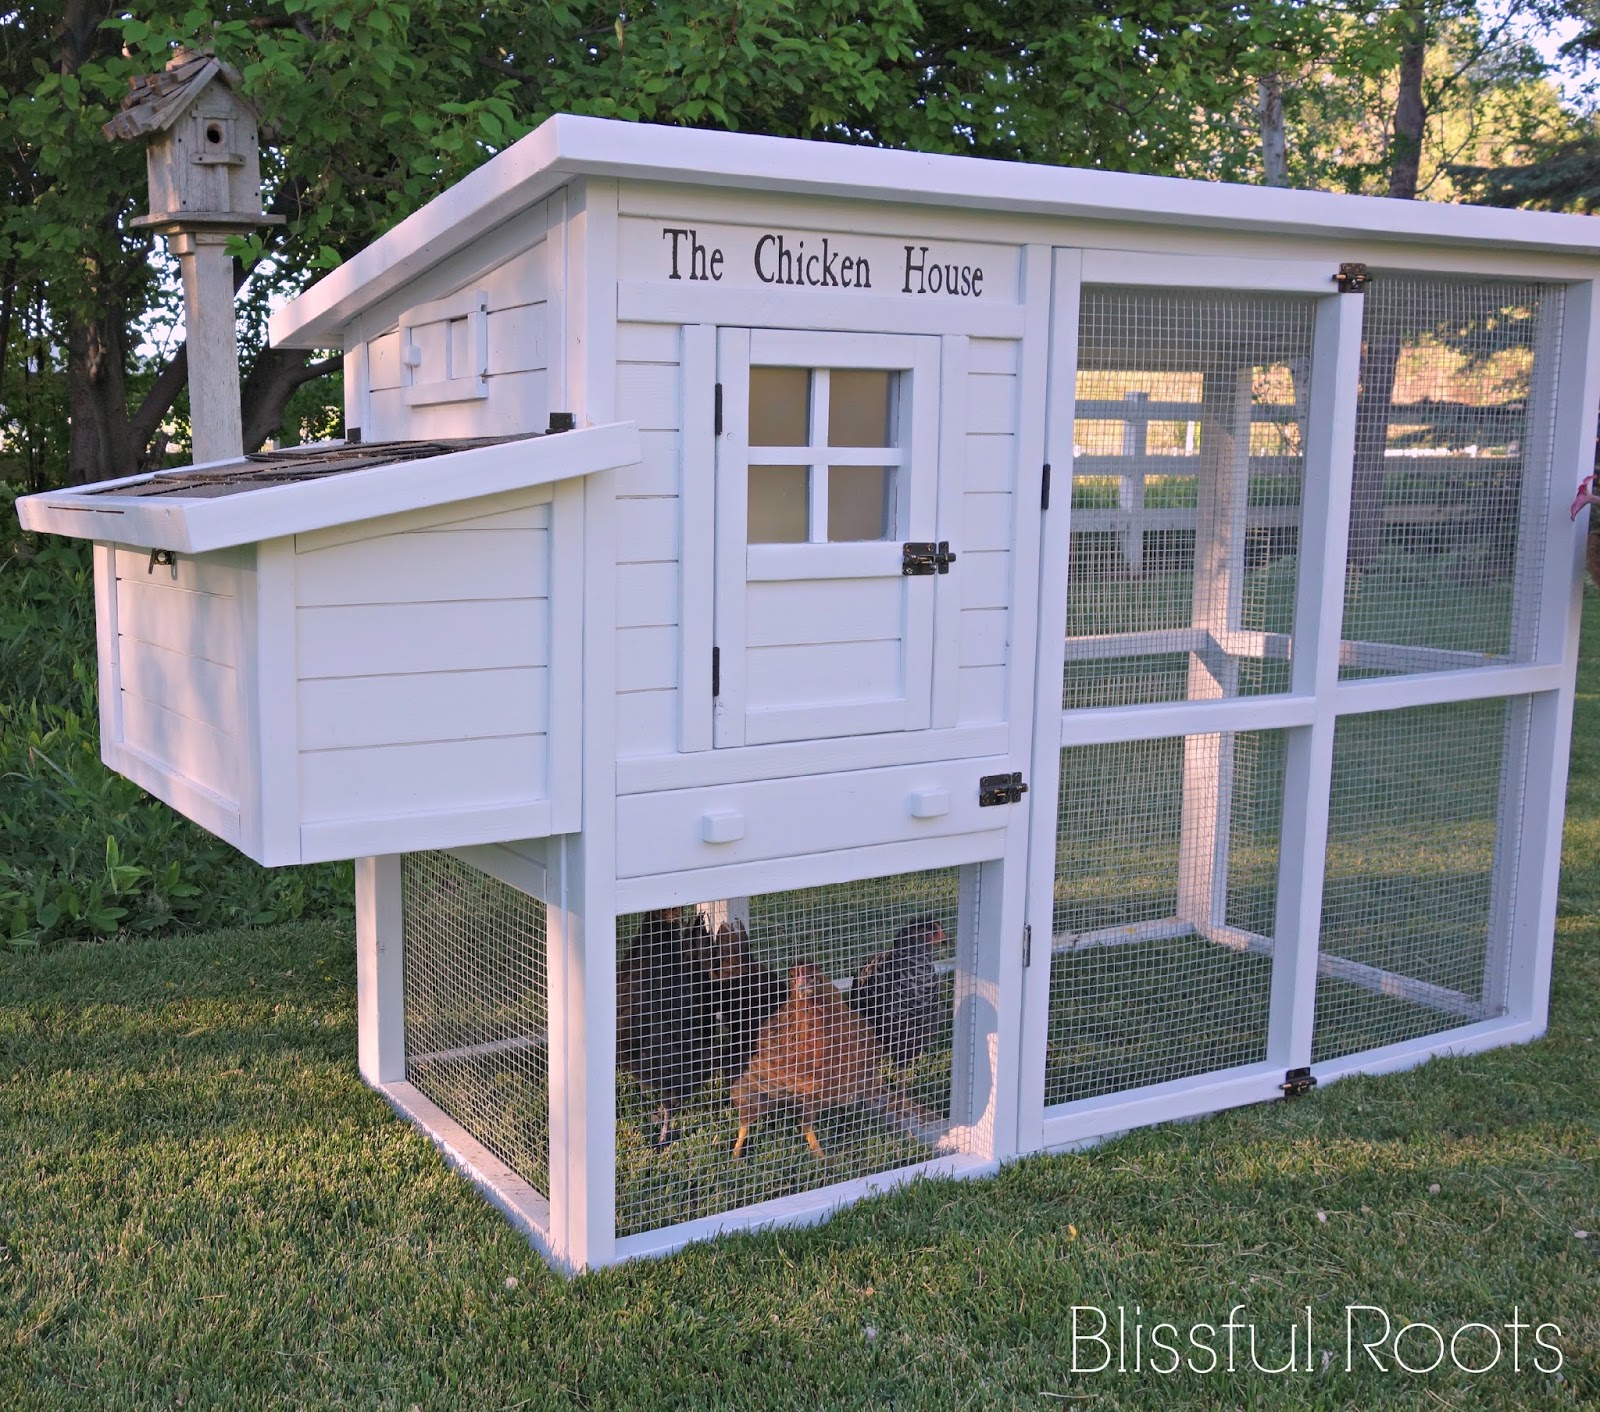 BLISSFUL ROOTS: Chicken Coop Reveal